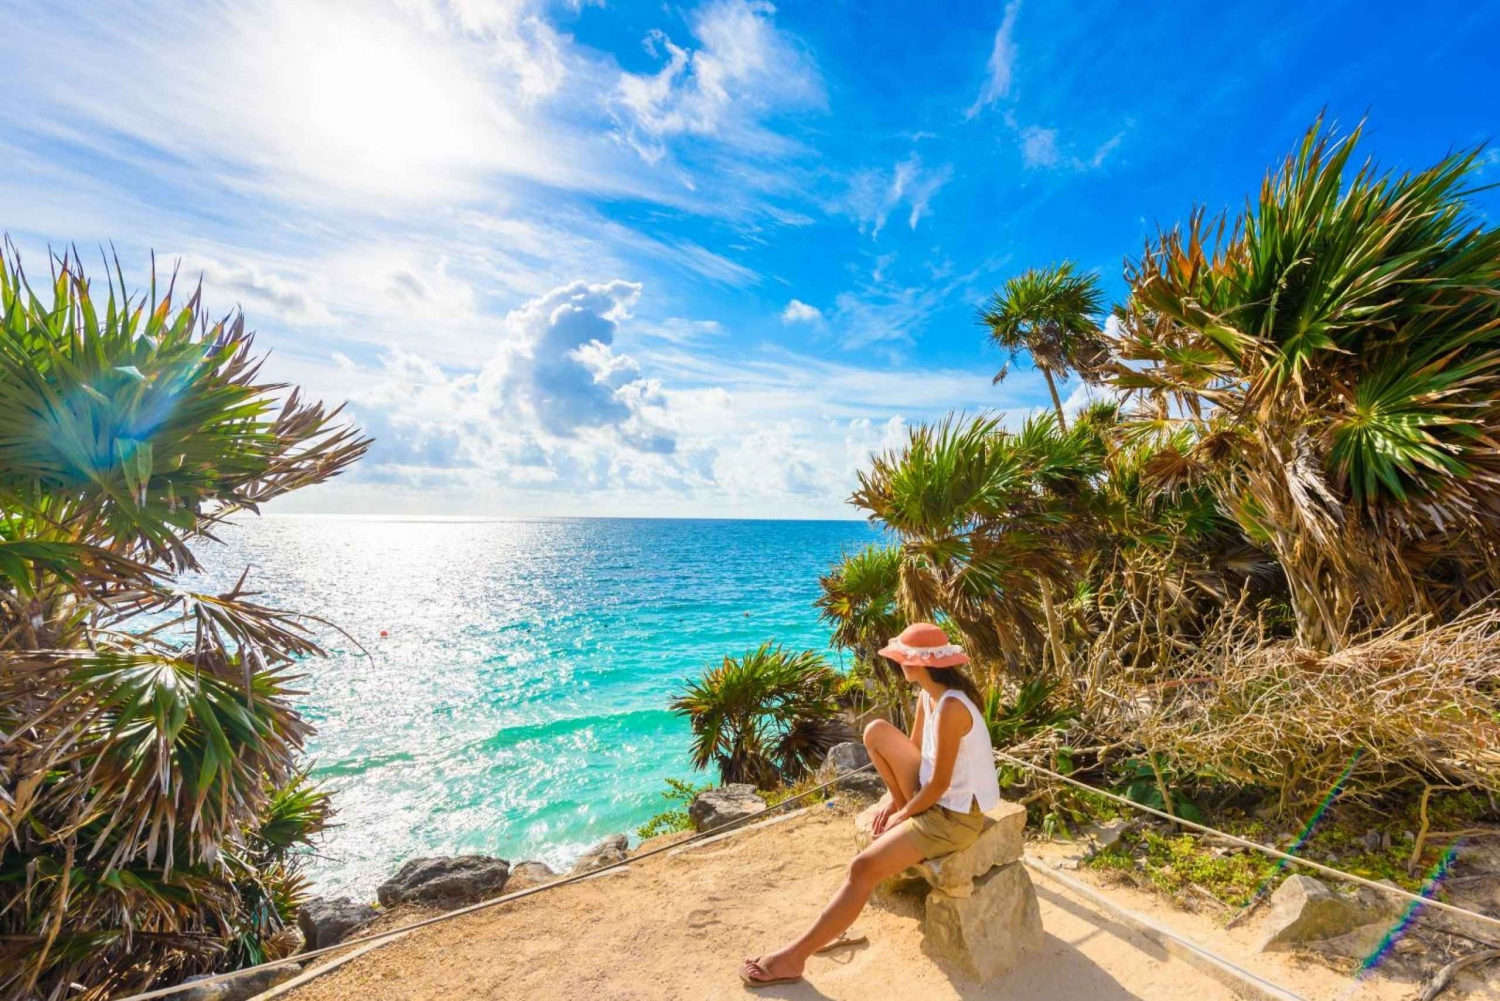 Tulum: Tulum Archeological Site 1.5-Hour Guided Walking Tour